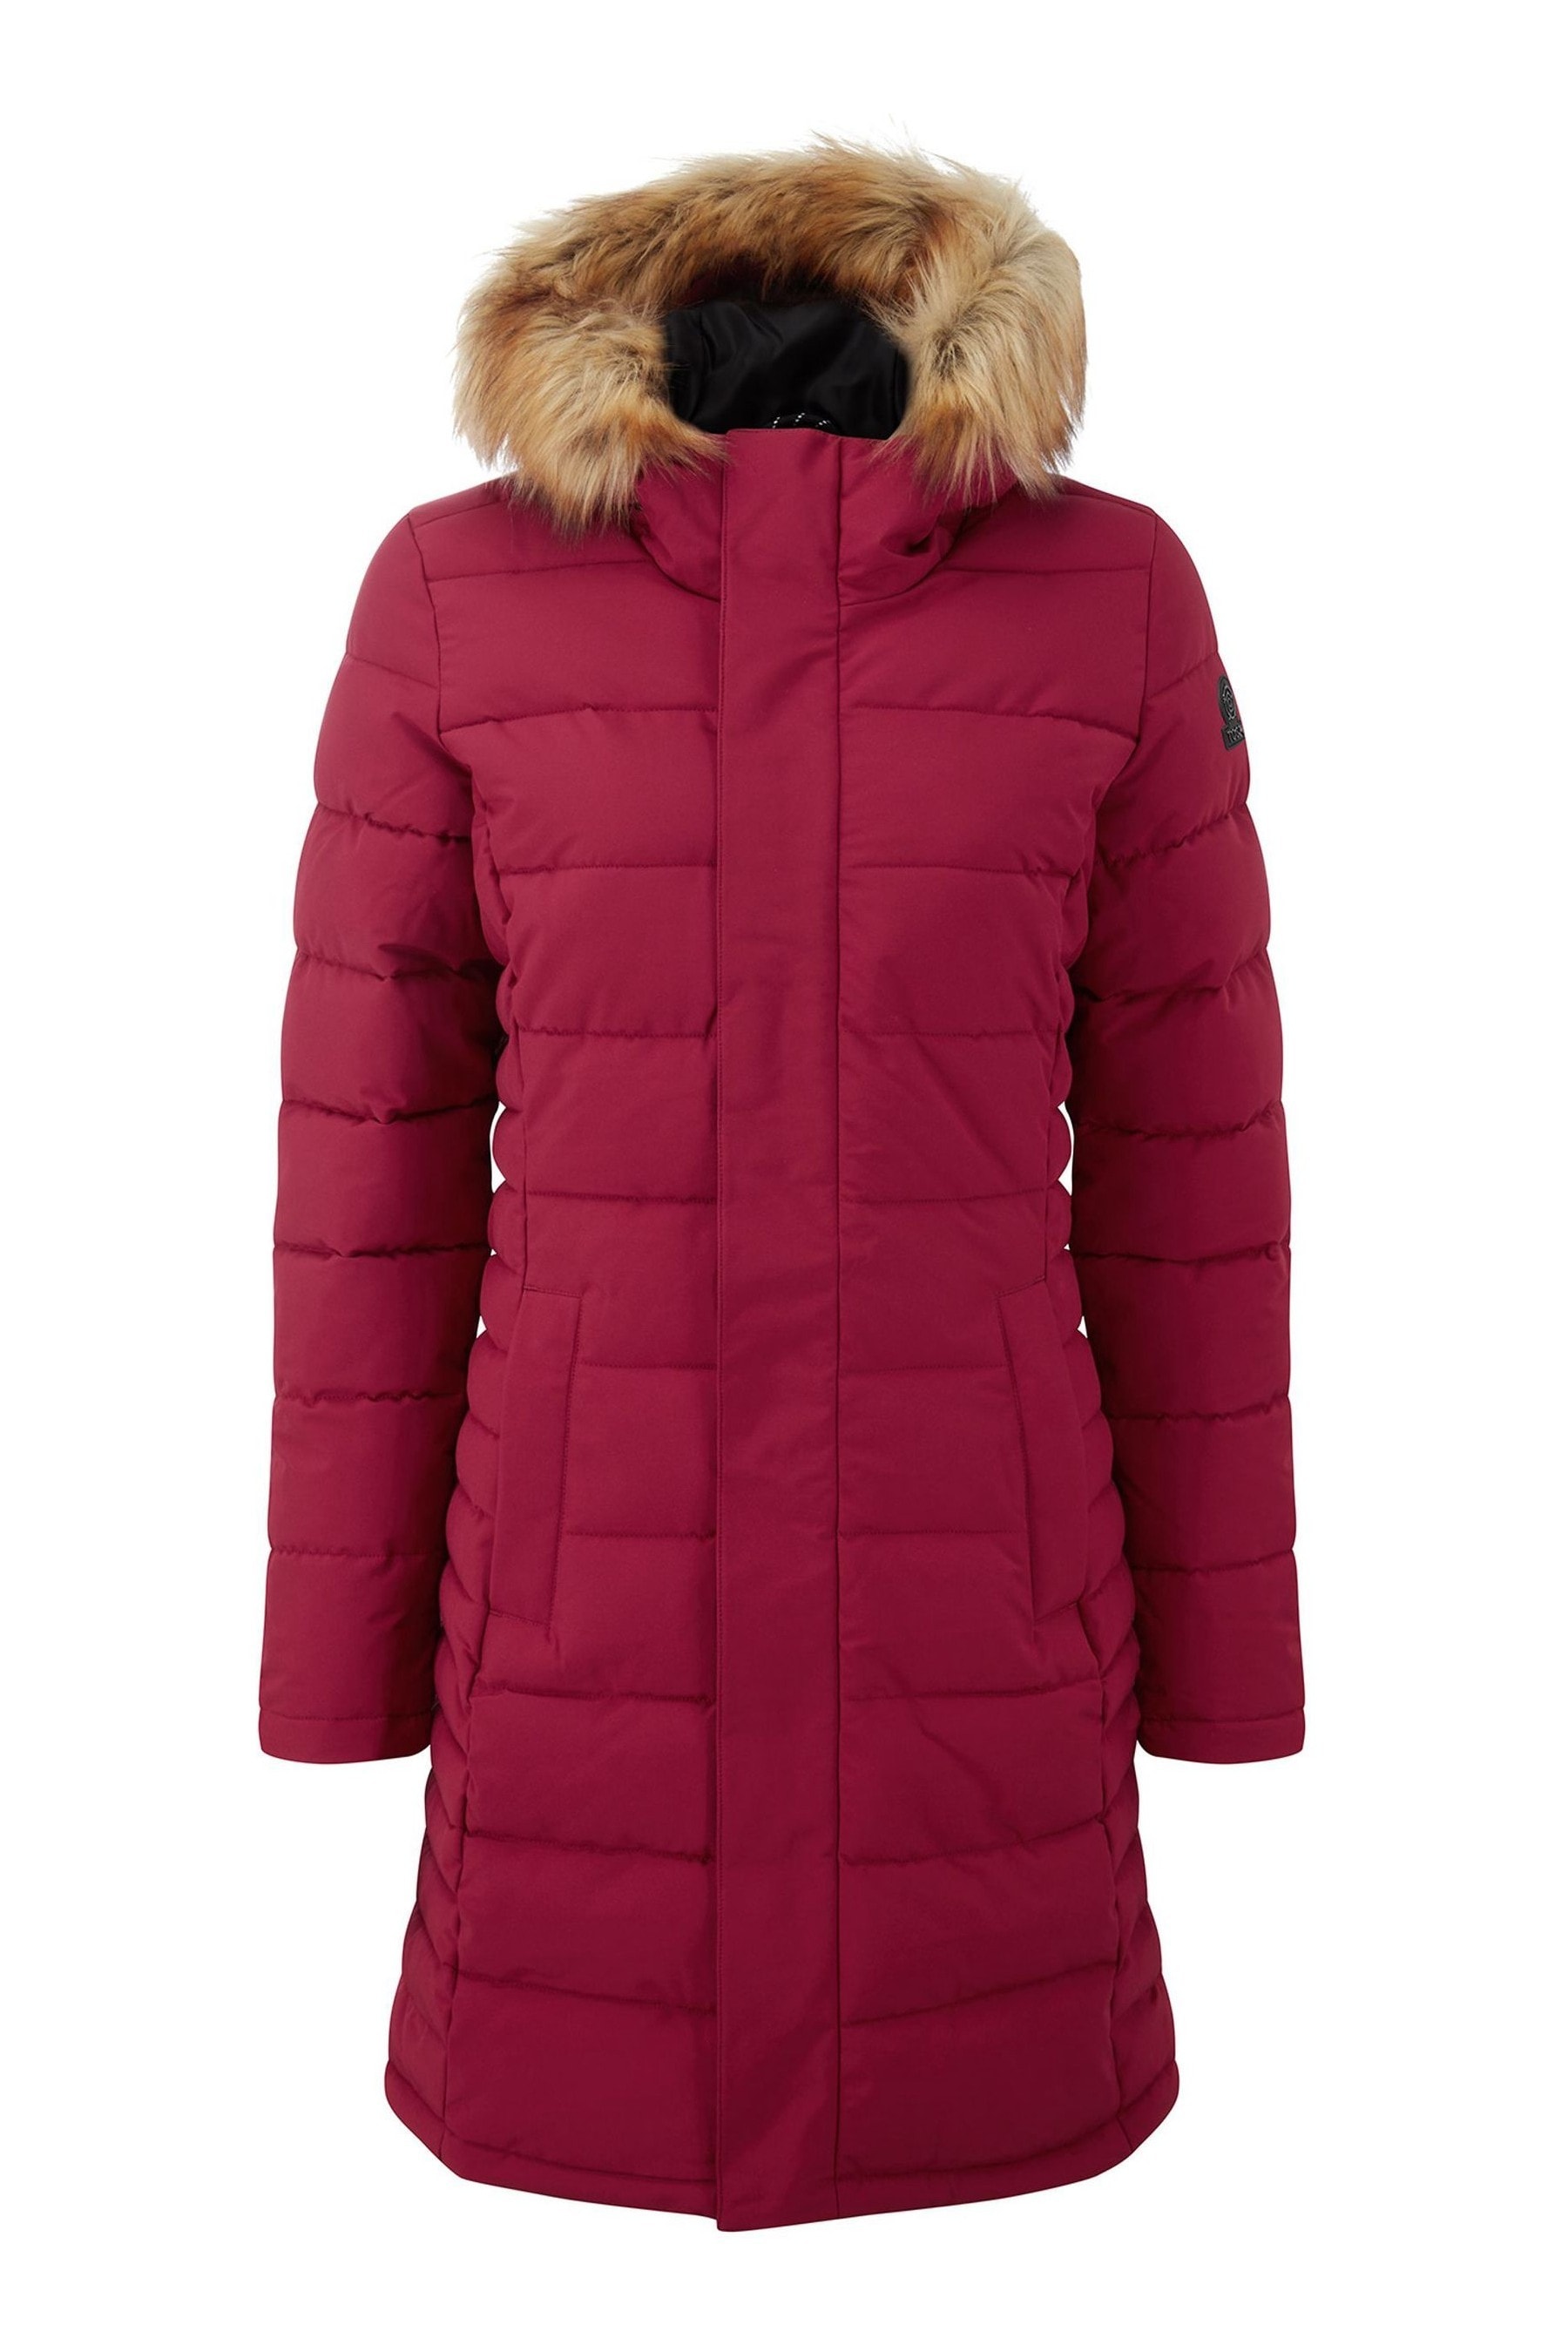 Buy Tog 24 Firbeck Womens Long Insulated Jacket from the Next UK online ...